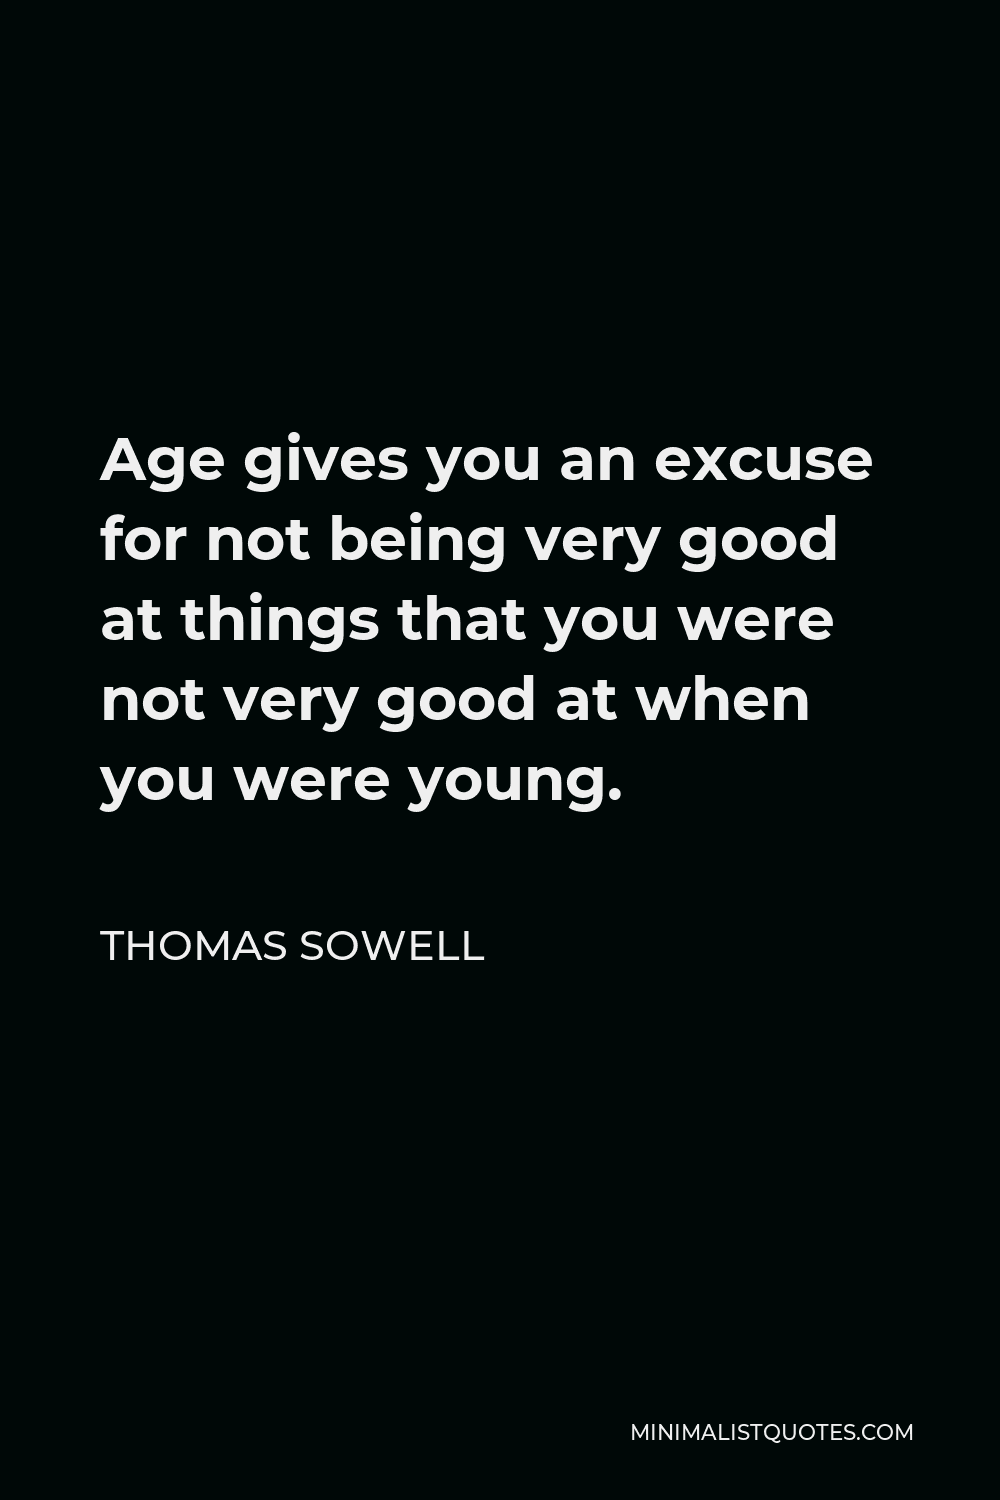 Thomas Sowell Quote - Age gives you an excuse for not being very good at things that you were not very good at when you were young.